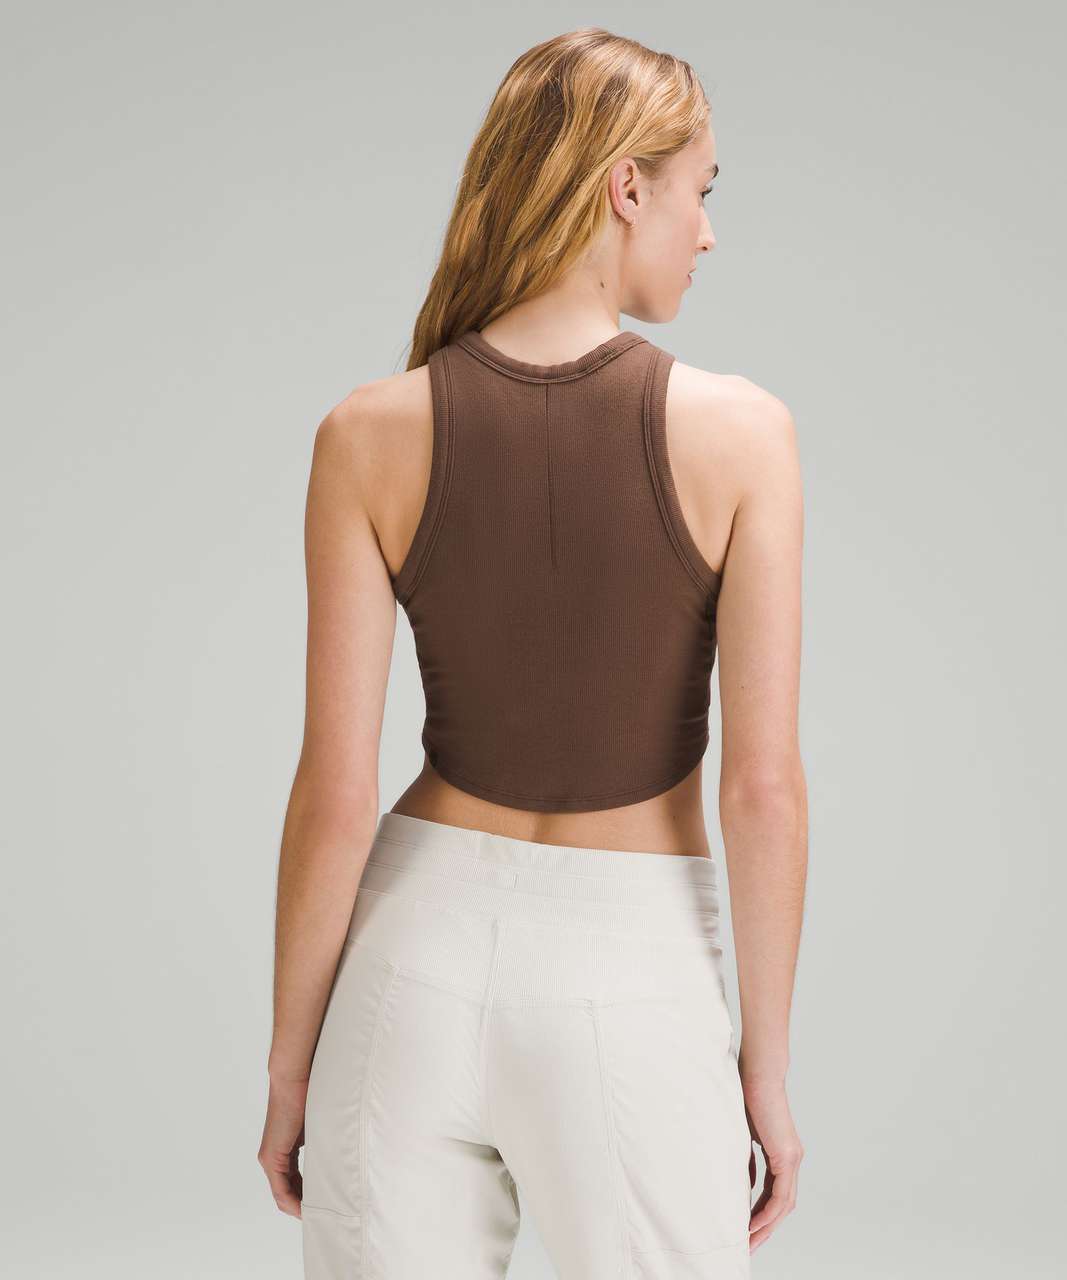 Lululemon Hold Tight Cropped Tank Top - White/Neutral - Size 10 Ribbed Modal Fabric